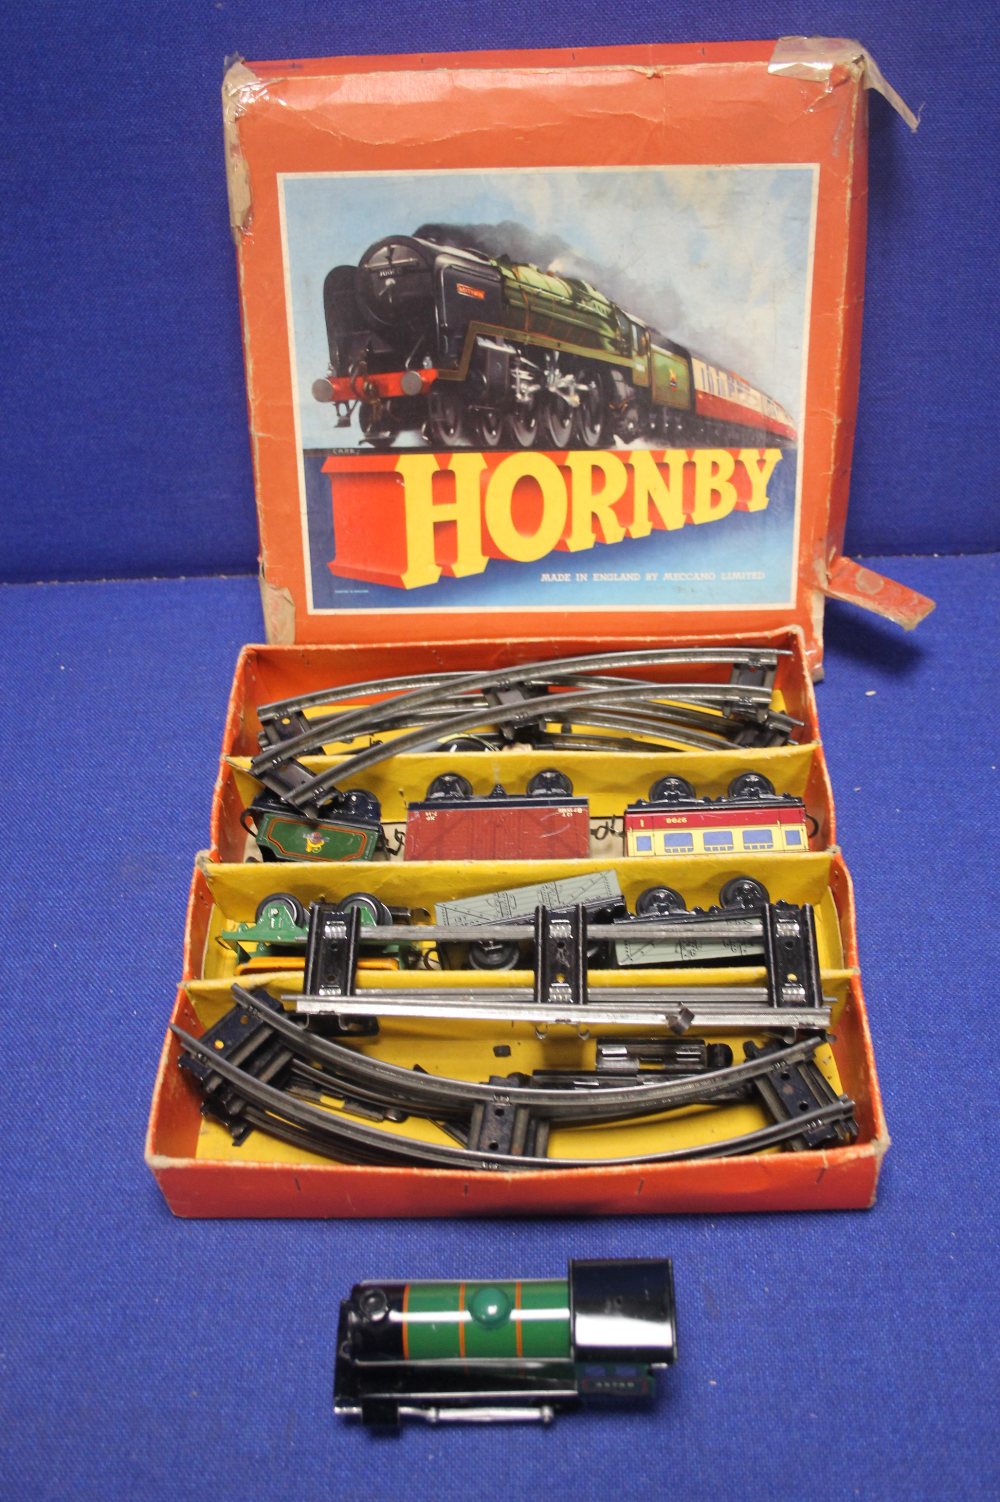 BOXED HORNBY TRAIN O GAUGE GOODS SET WITH TRACK, TENDER, CARRIAGE AND ROLLING STOCK, together with a